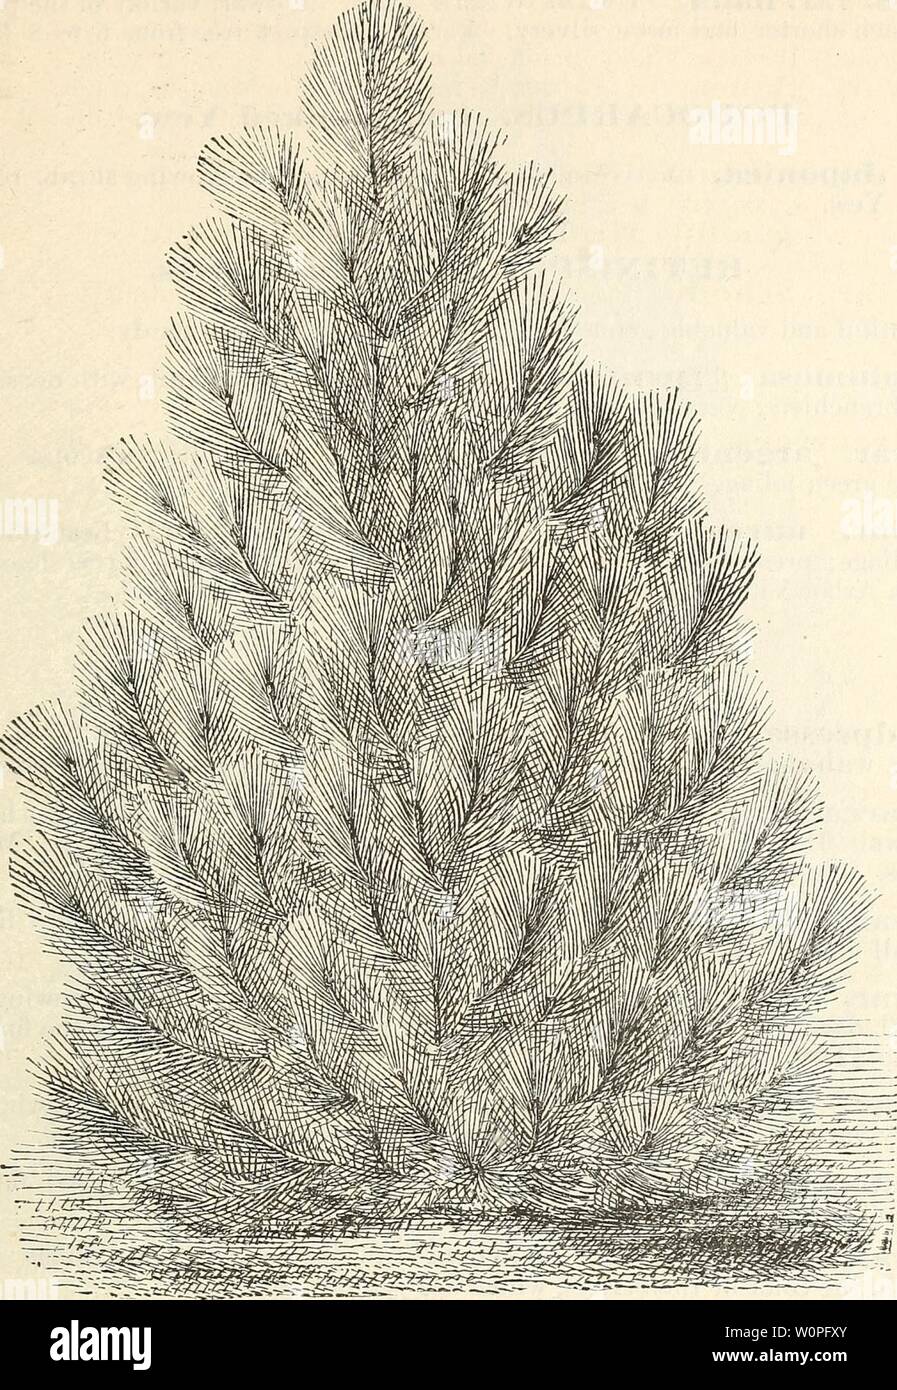 Archive image from page 58 of Descriptive catalogue of hardy ornamental. Descriptive catalogue of hardy ornamental trees, shrubs, herbaceous perennial plants, etc. : twenty-fourth edition descriptivecatal1880ellw Year: 1880  ORNAMENTAL TREES, SHRUBS, ETC. 51    PINUS PONDEROSA. Sec. III. Usually with five leaves in a sheath, fP. Ceml)ra. Swiss Stone Pine. A handsome and distinct European species, of a compact, conical form ; foliage short and silvery. Grows slowly when voung. $1.00 to $2.00. fP. excelsa. Lofty Bhotan Pine. A native of the mountains of Northern India. A graceful and elegant tre Stock Photo